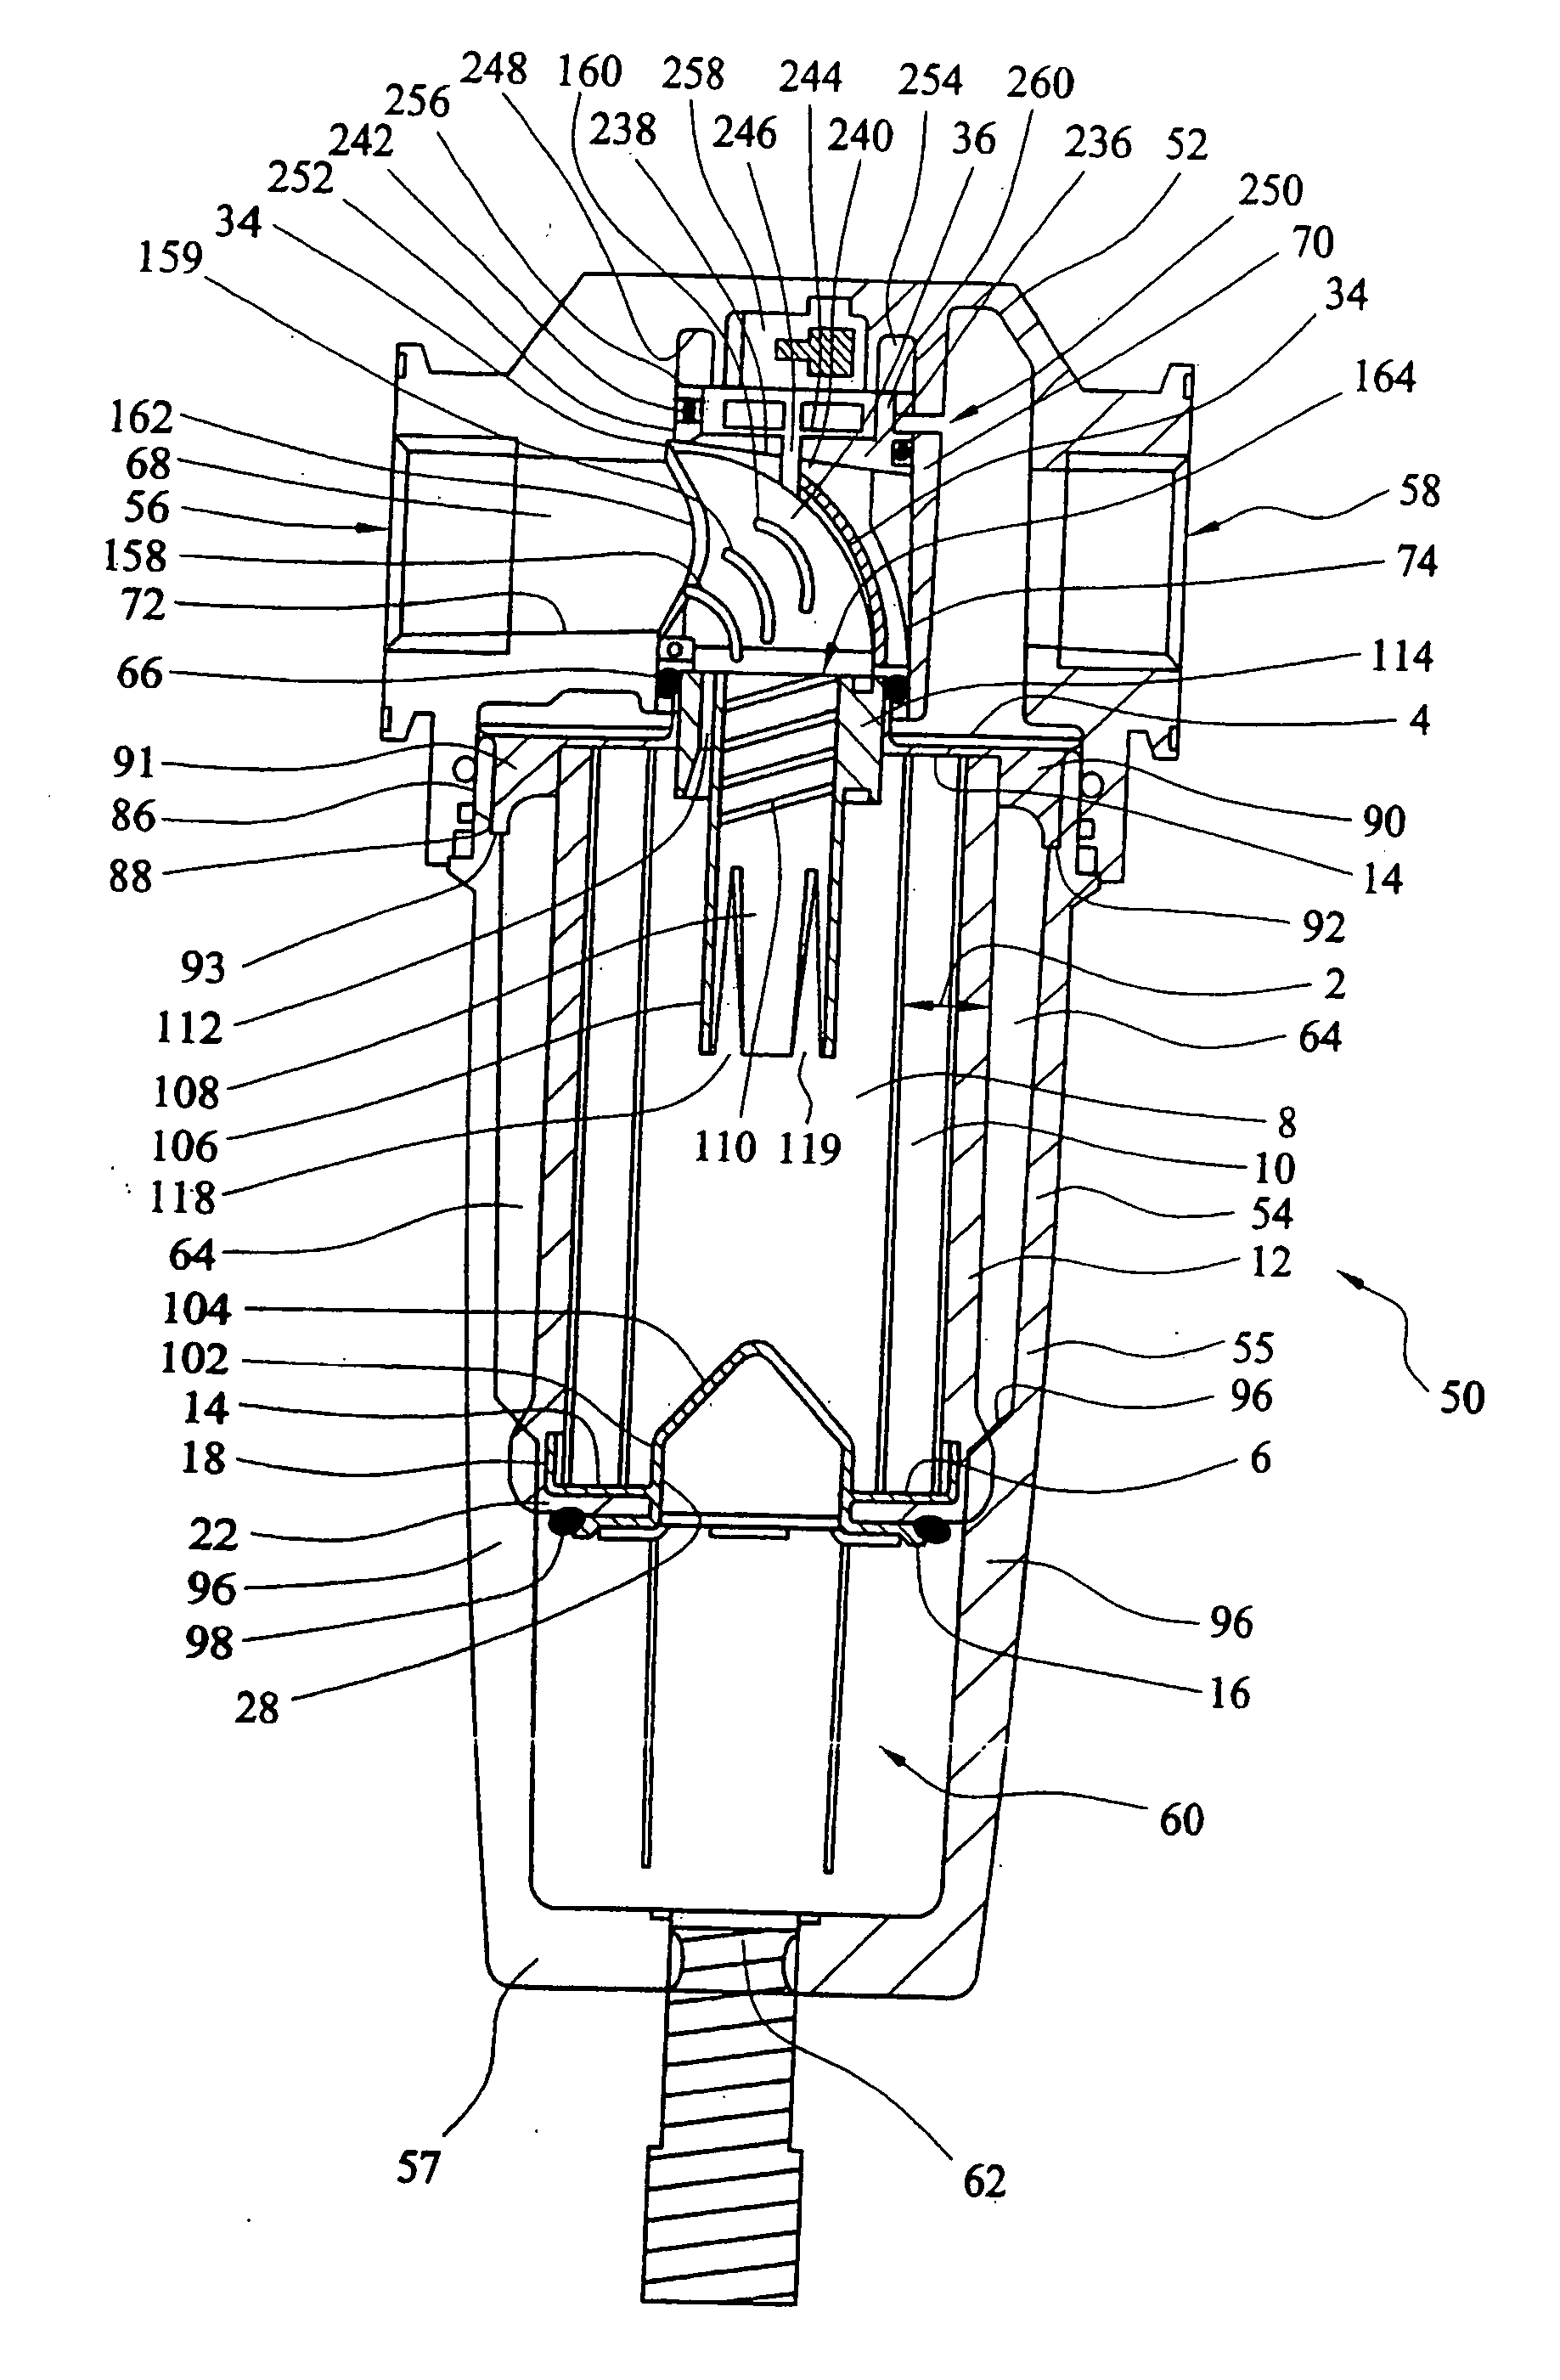 Assembly for collecting material entrained in a gas stream